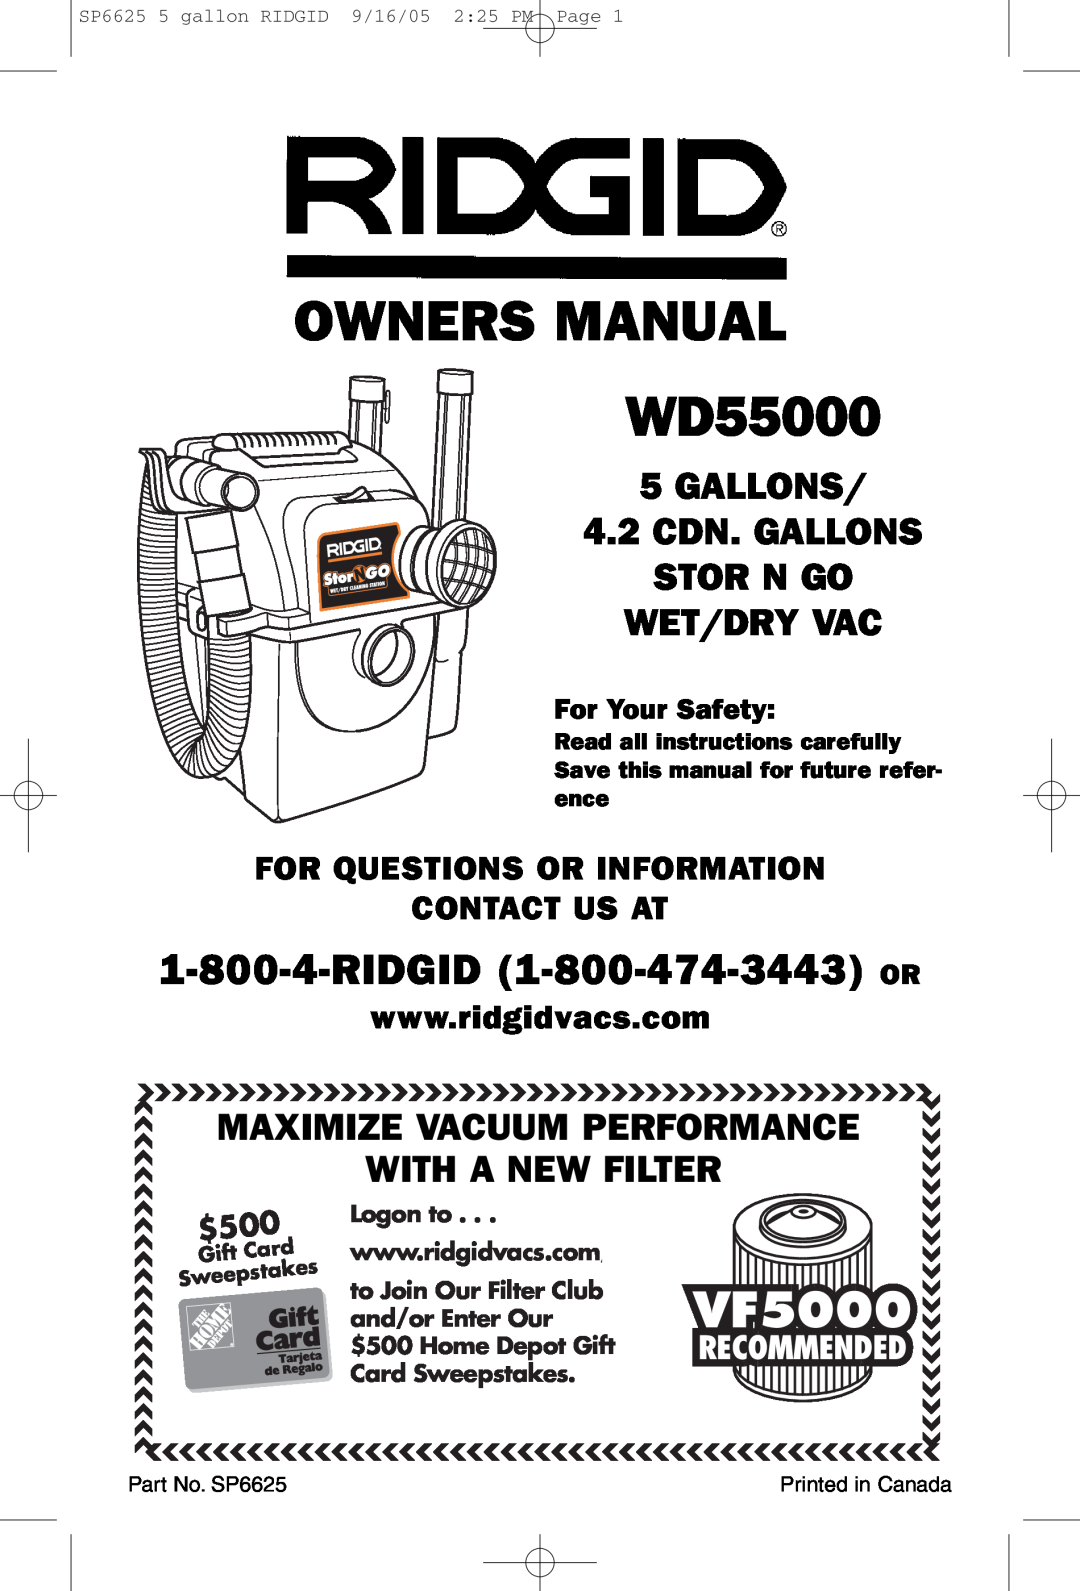 RIDGID WD55000 owner manual VF5000, For Questions Or Information Contact Us At, Ma Imize Vacuum P Forman E, $500, Gift 